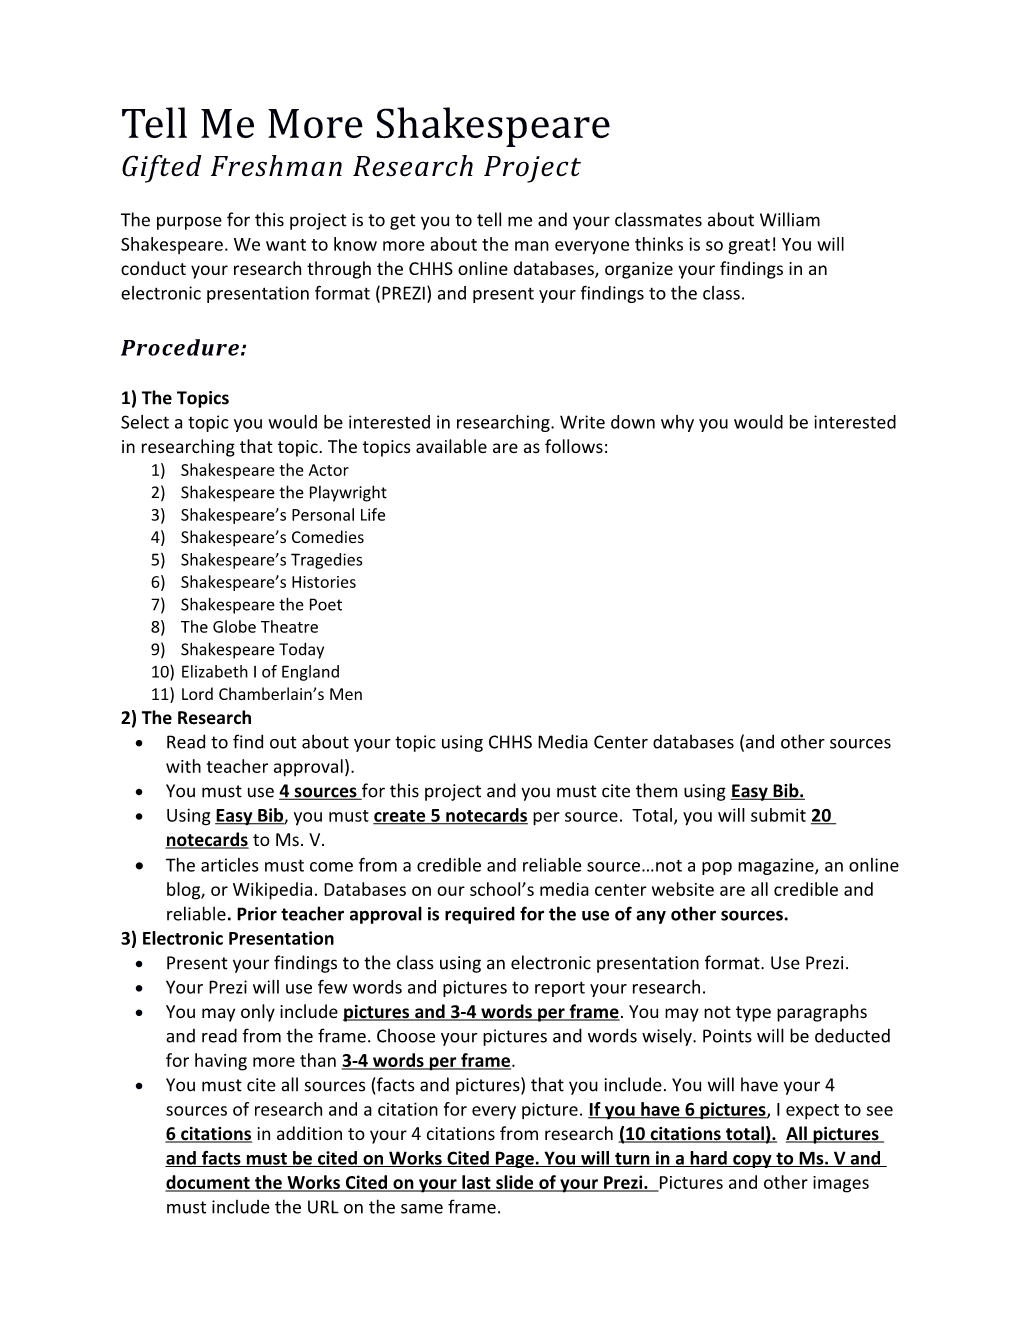 Gifted Freshman Research Project